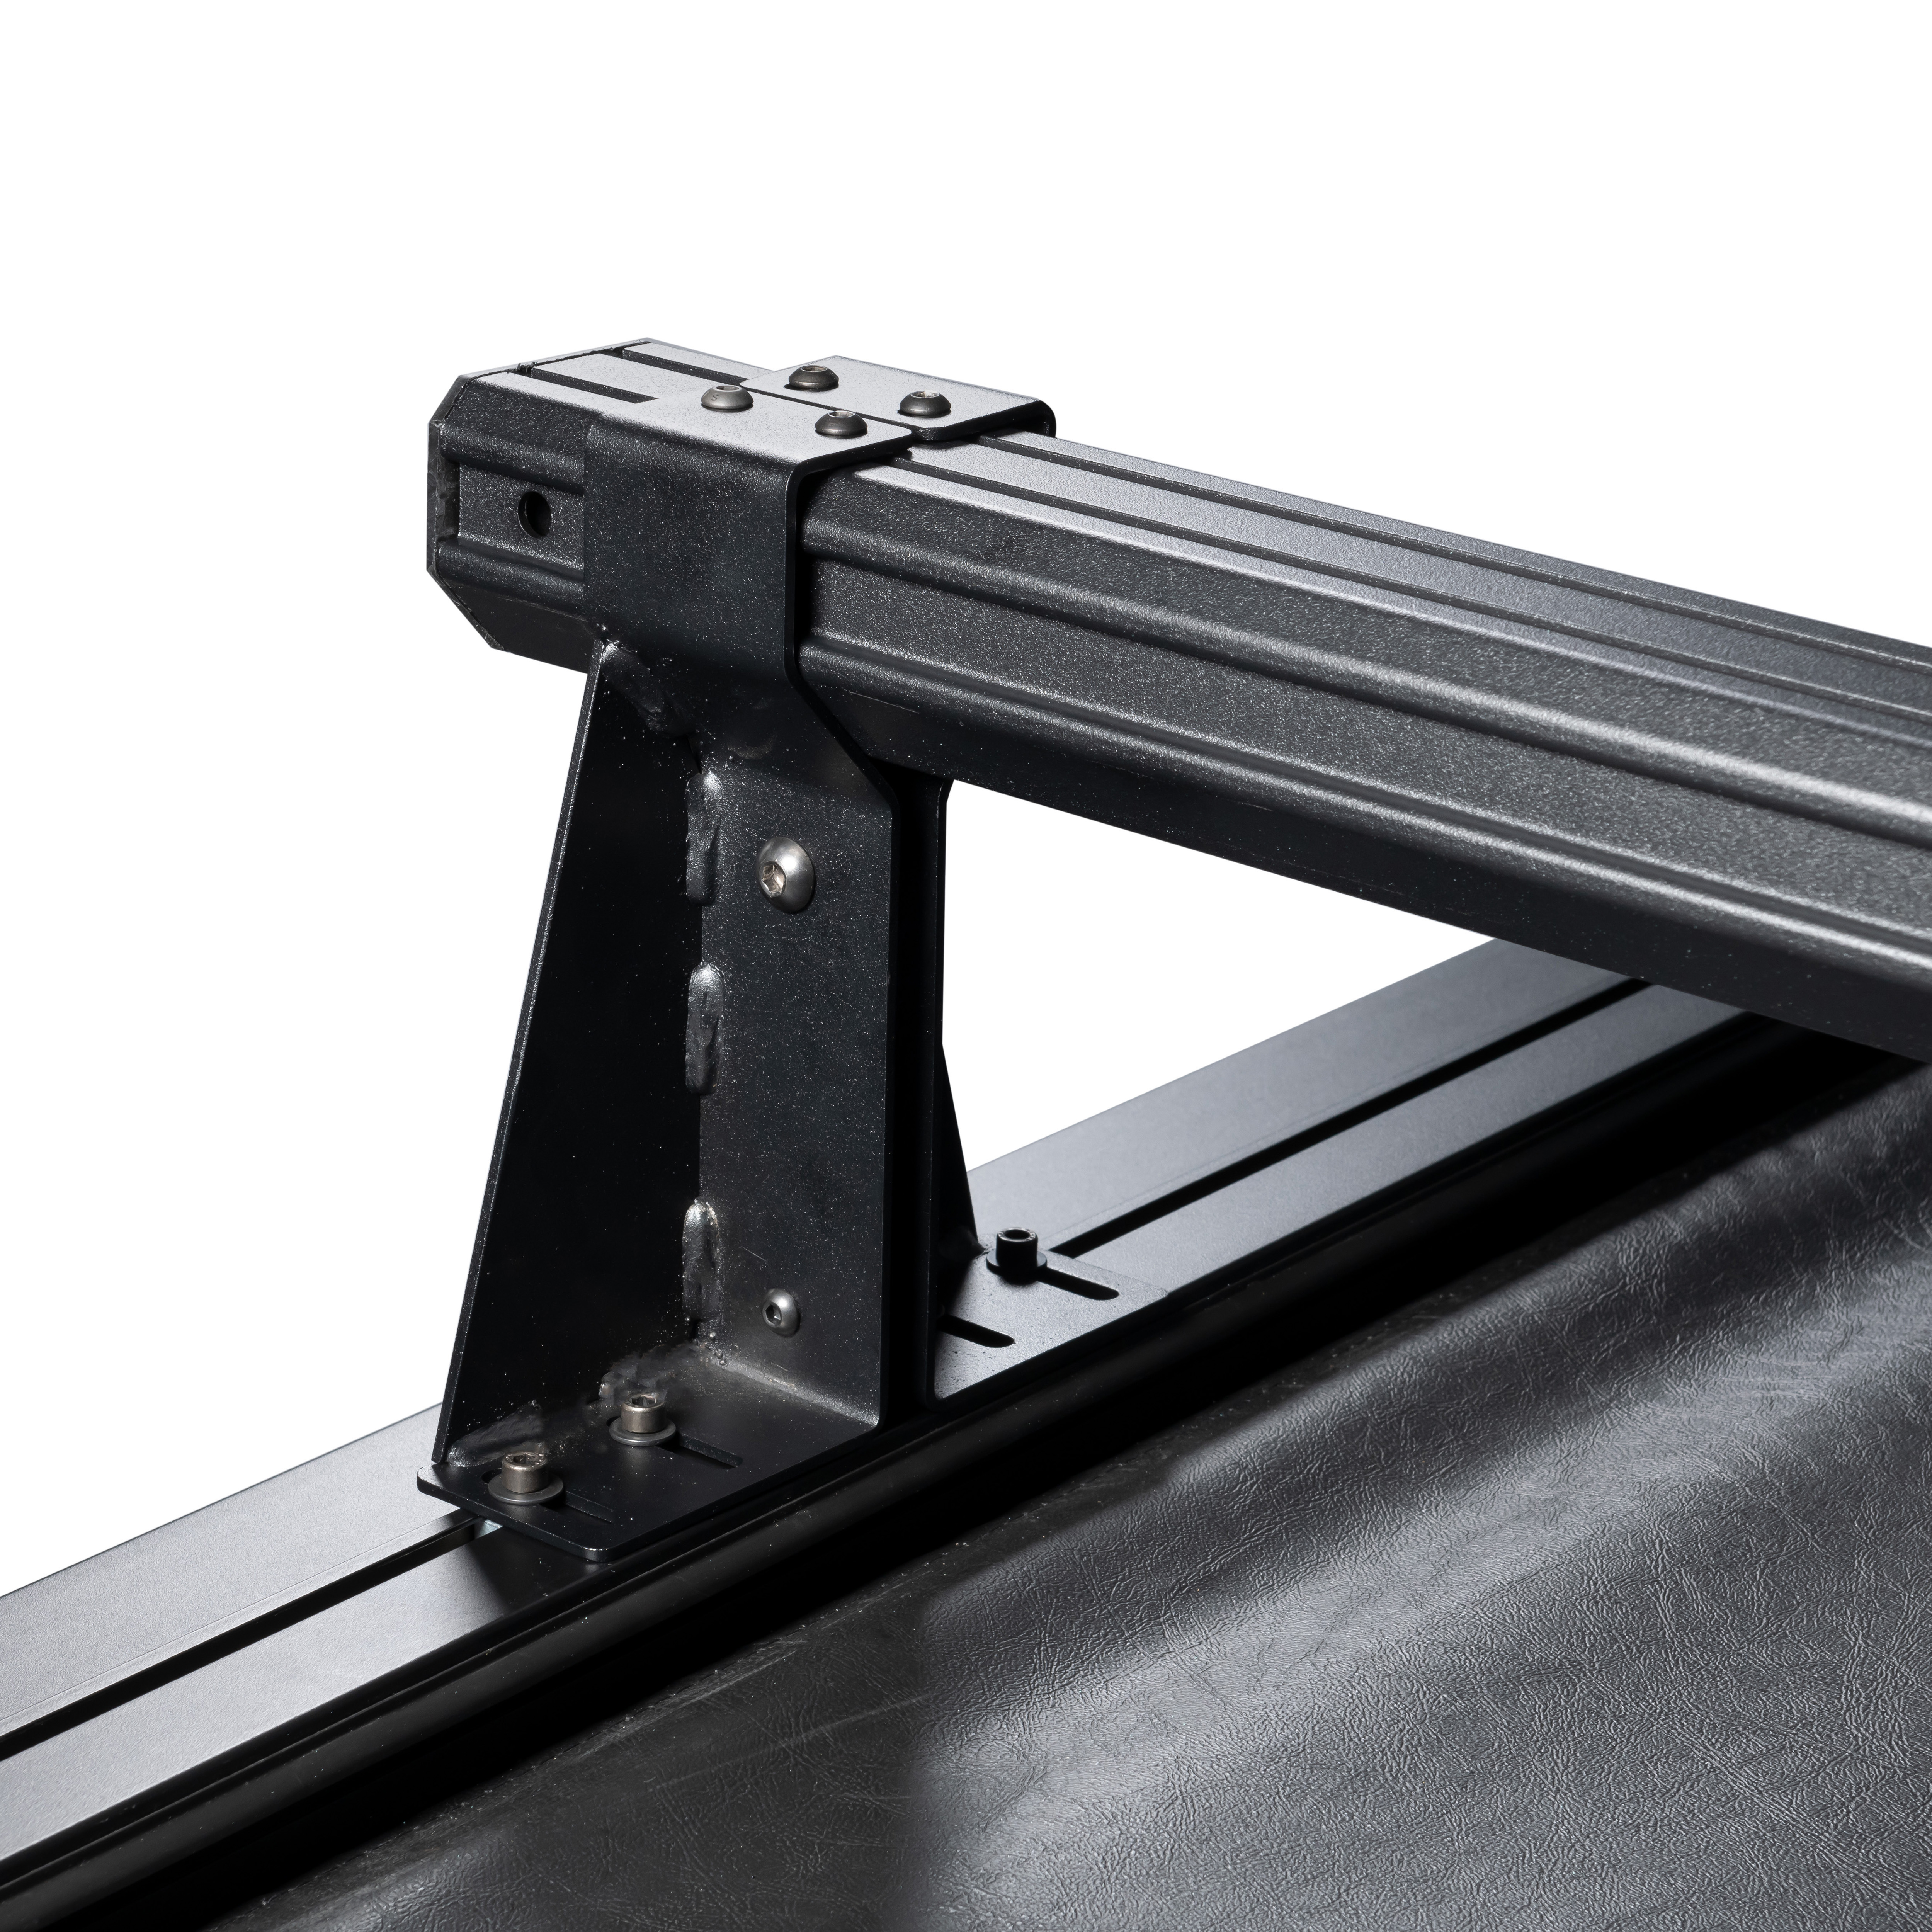 Universal Roof Top Rack Soft Cross Bars Installation Guide by LT